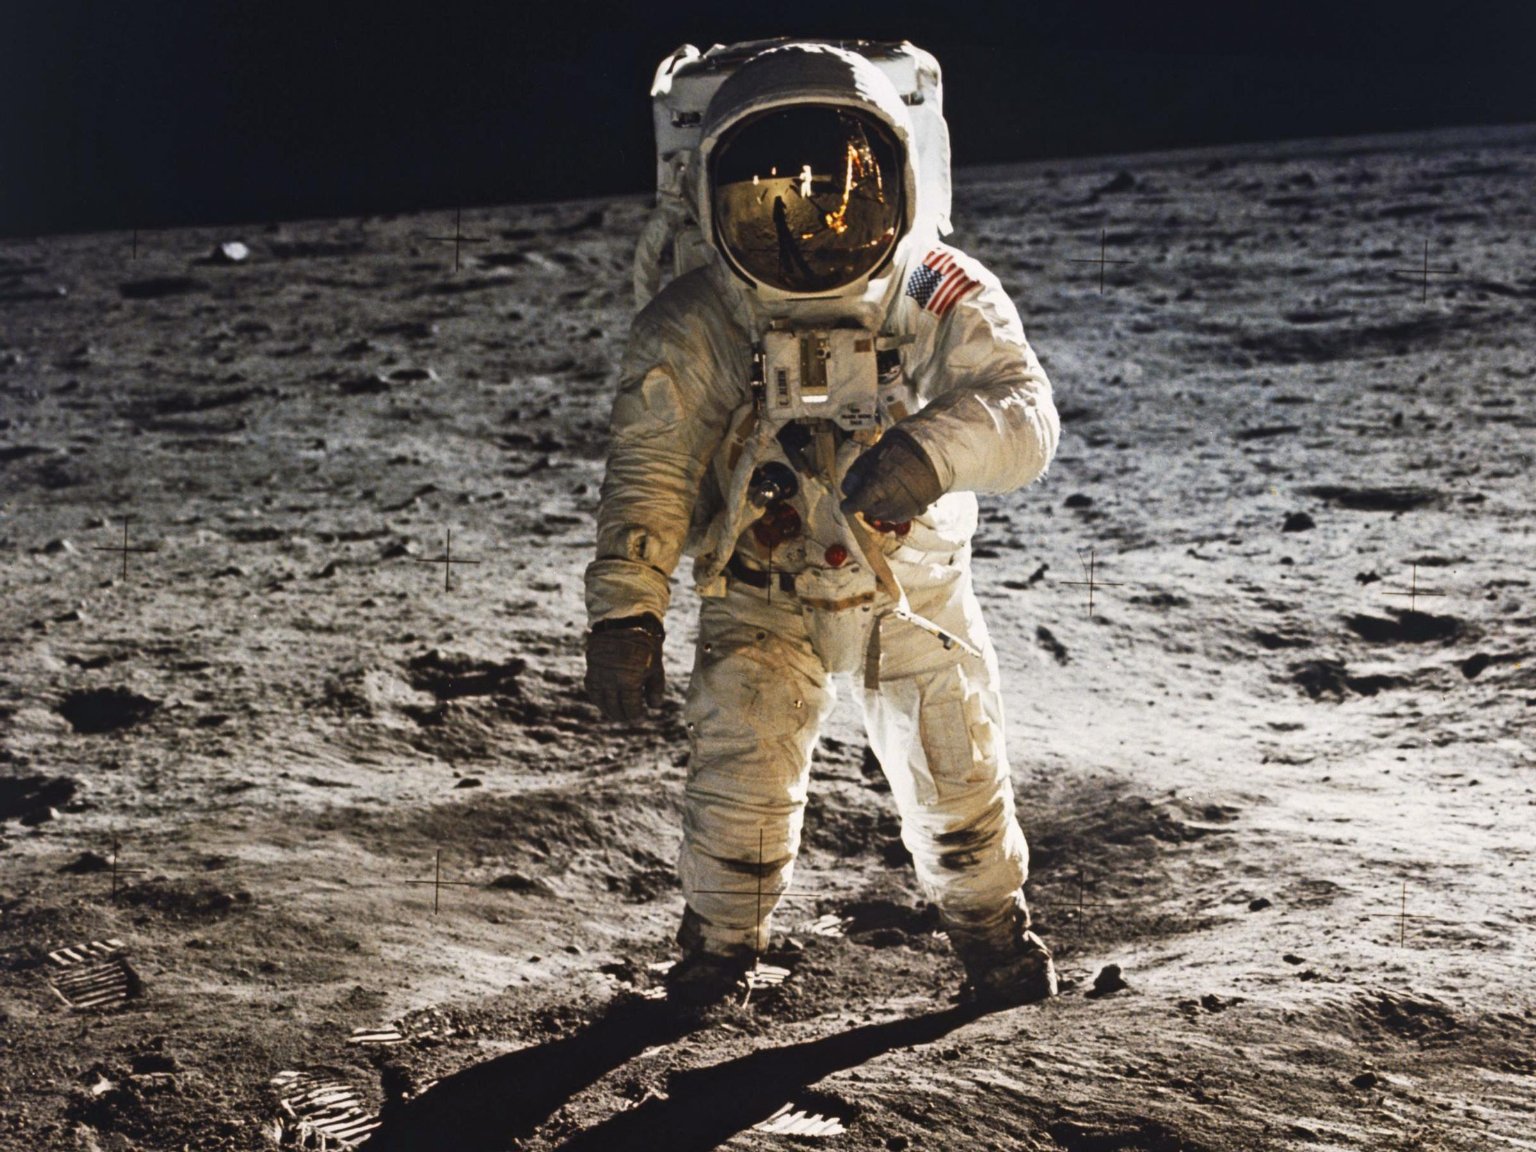 Narration-Free Apollo 11 Documentary Put Viewers in the Thick of It